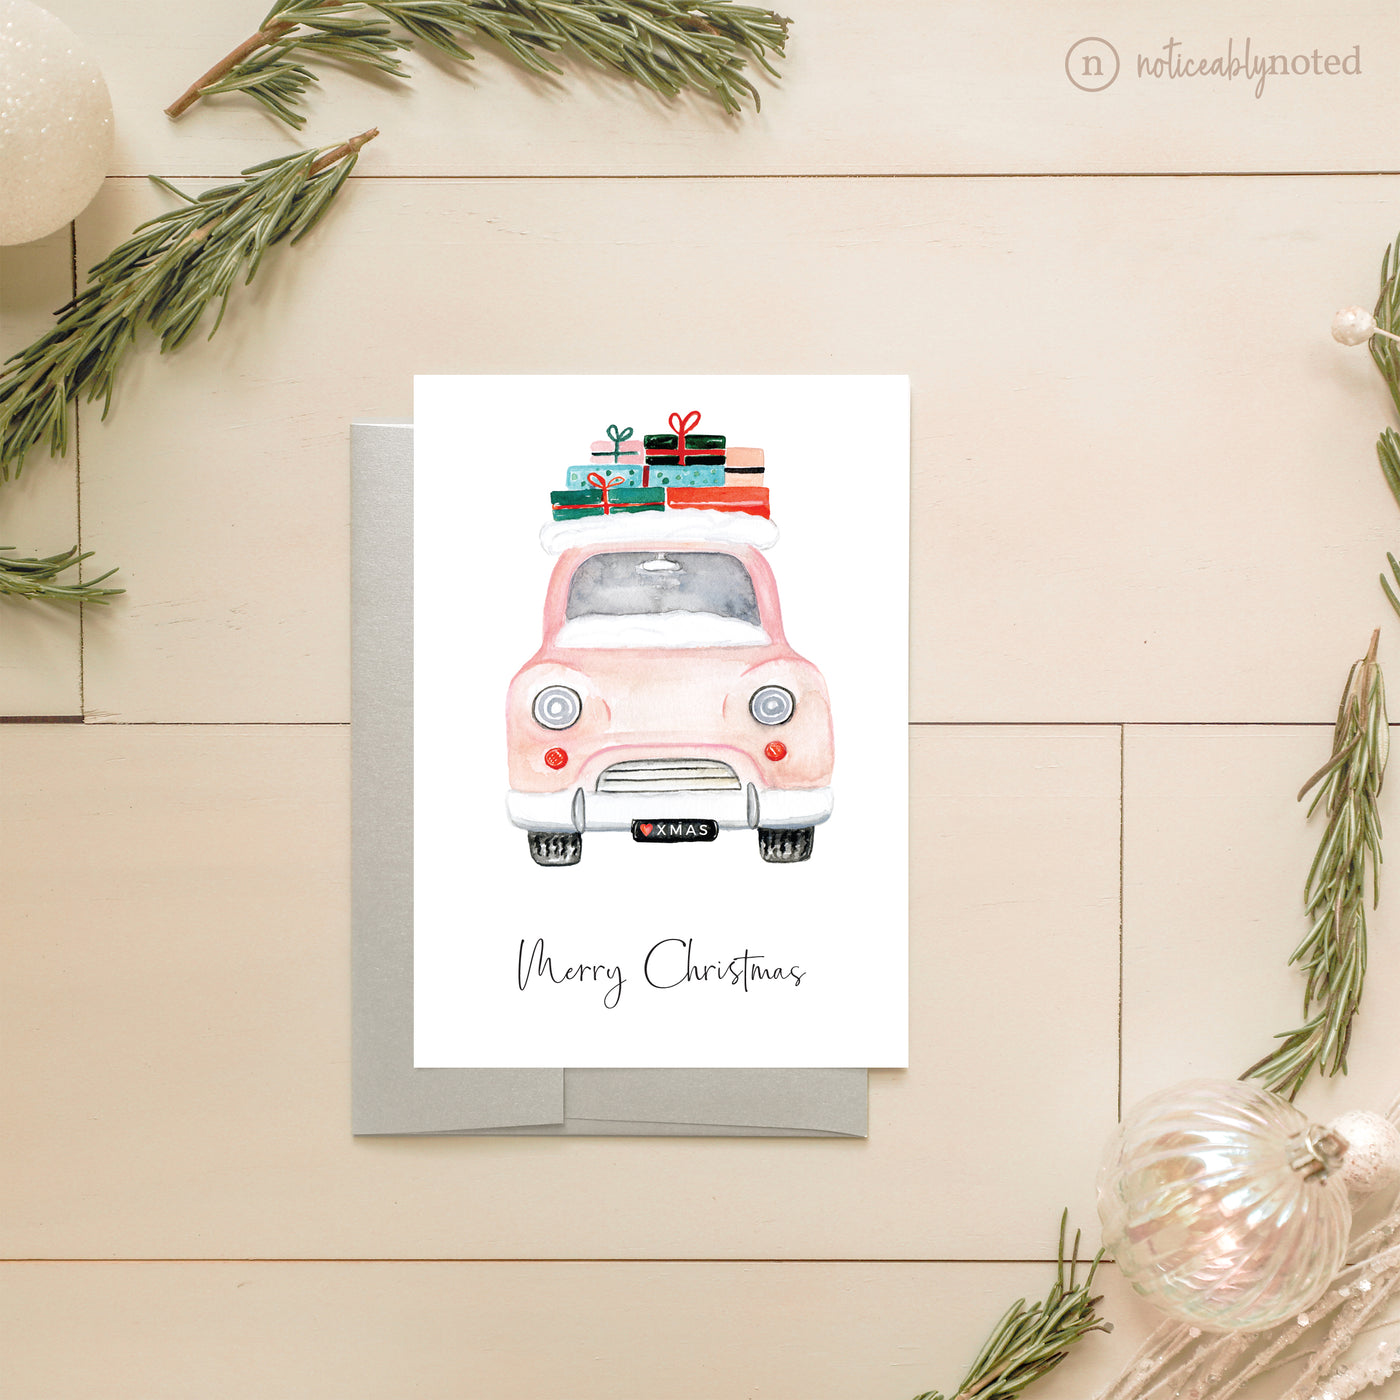 Christmas Car Holiday Card | Noticeably Noted